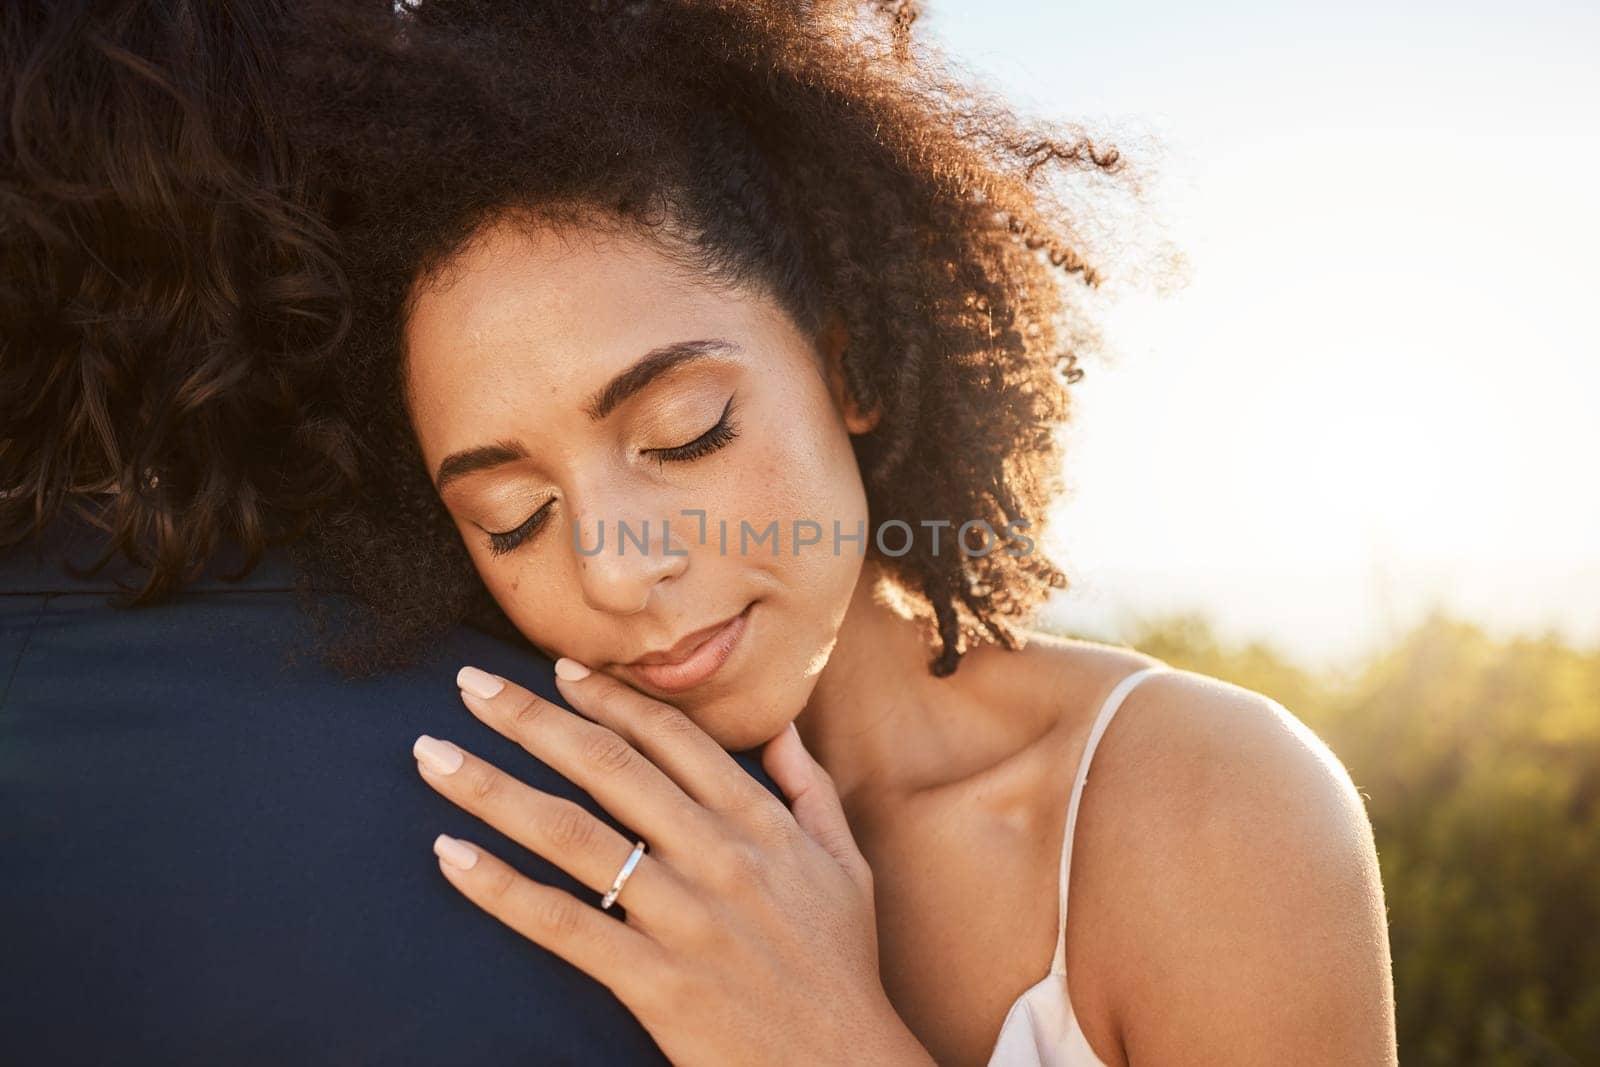 Wedding, bride and hug at sunset with embrace together for care, love and support in married life. Marriage of happy black woman hugging man in romance for commitment embracing relationship in nature by YuriArcurs